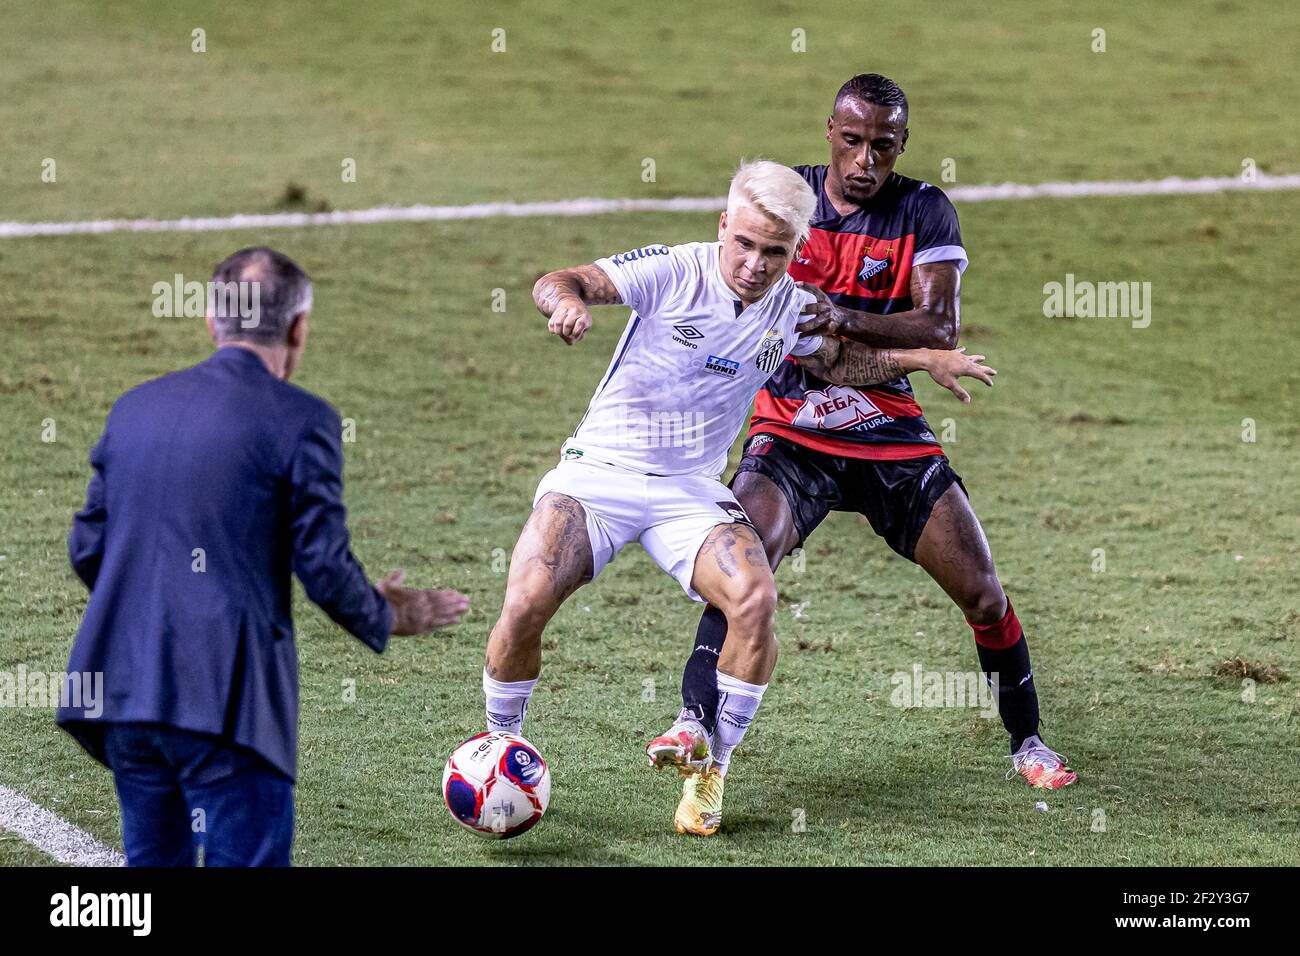 Santos, Brazil. 13th Mar, 2021. Soteldo being observed by coach Ariel Holan in the match between Santos and Ituano valid for the 4th round of the Paulista Football Championship Series A, held at Estádio Urbano Caldeira, Vila Belmiro, on the night of this Saturday, March 13, 2021. Credit: Van Campos/FotoArena/Alamy Live News Stock Photo